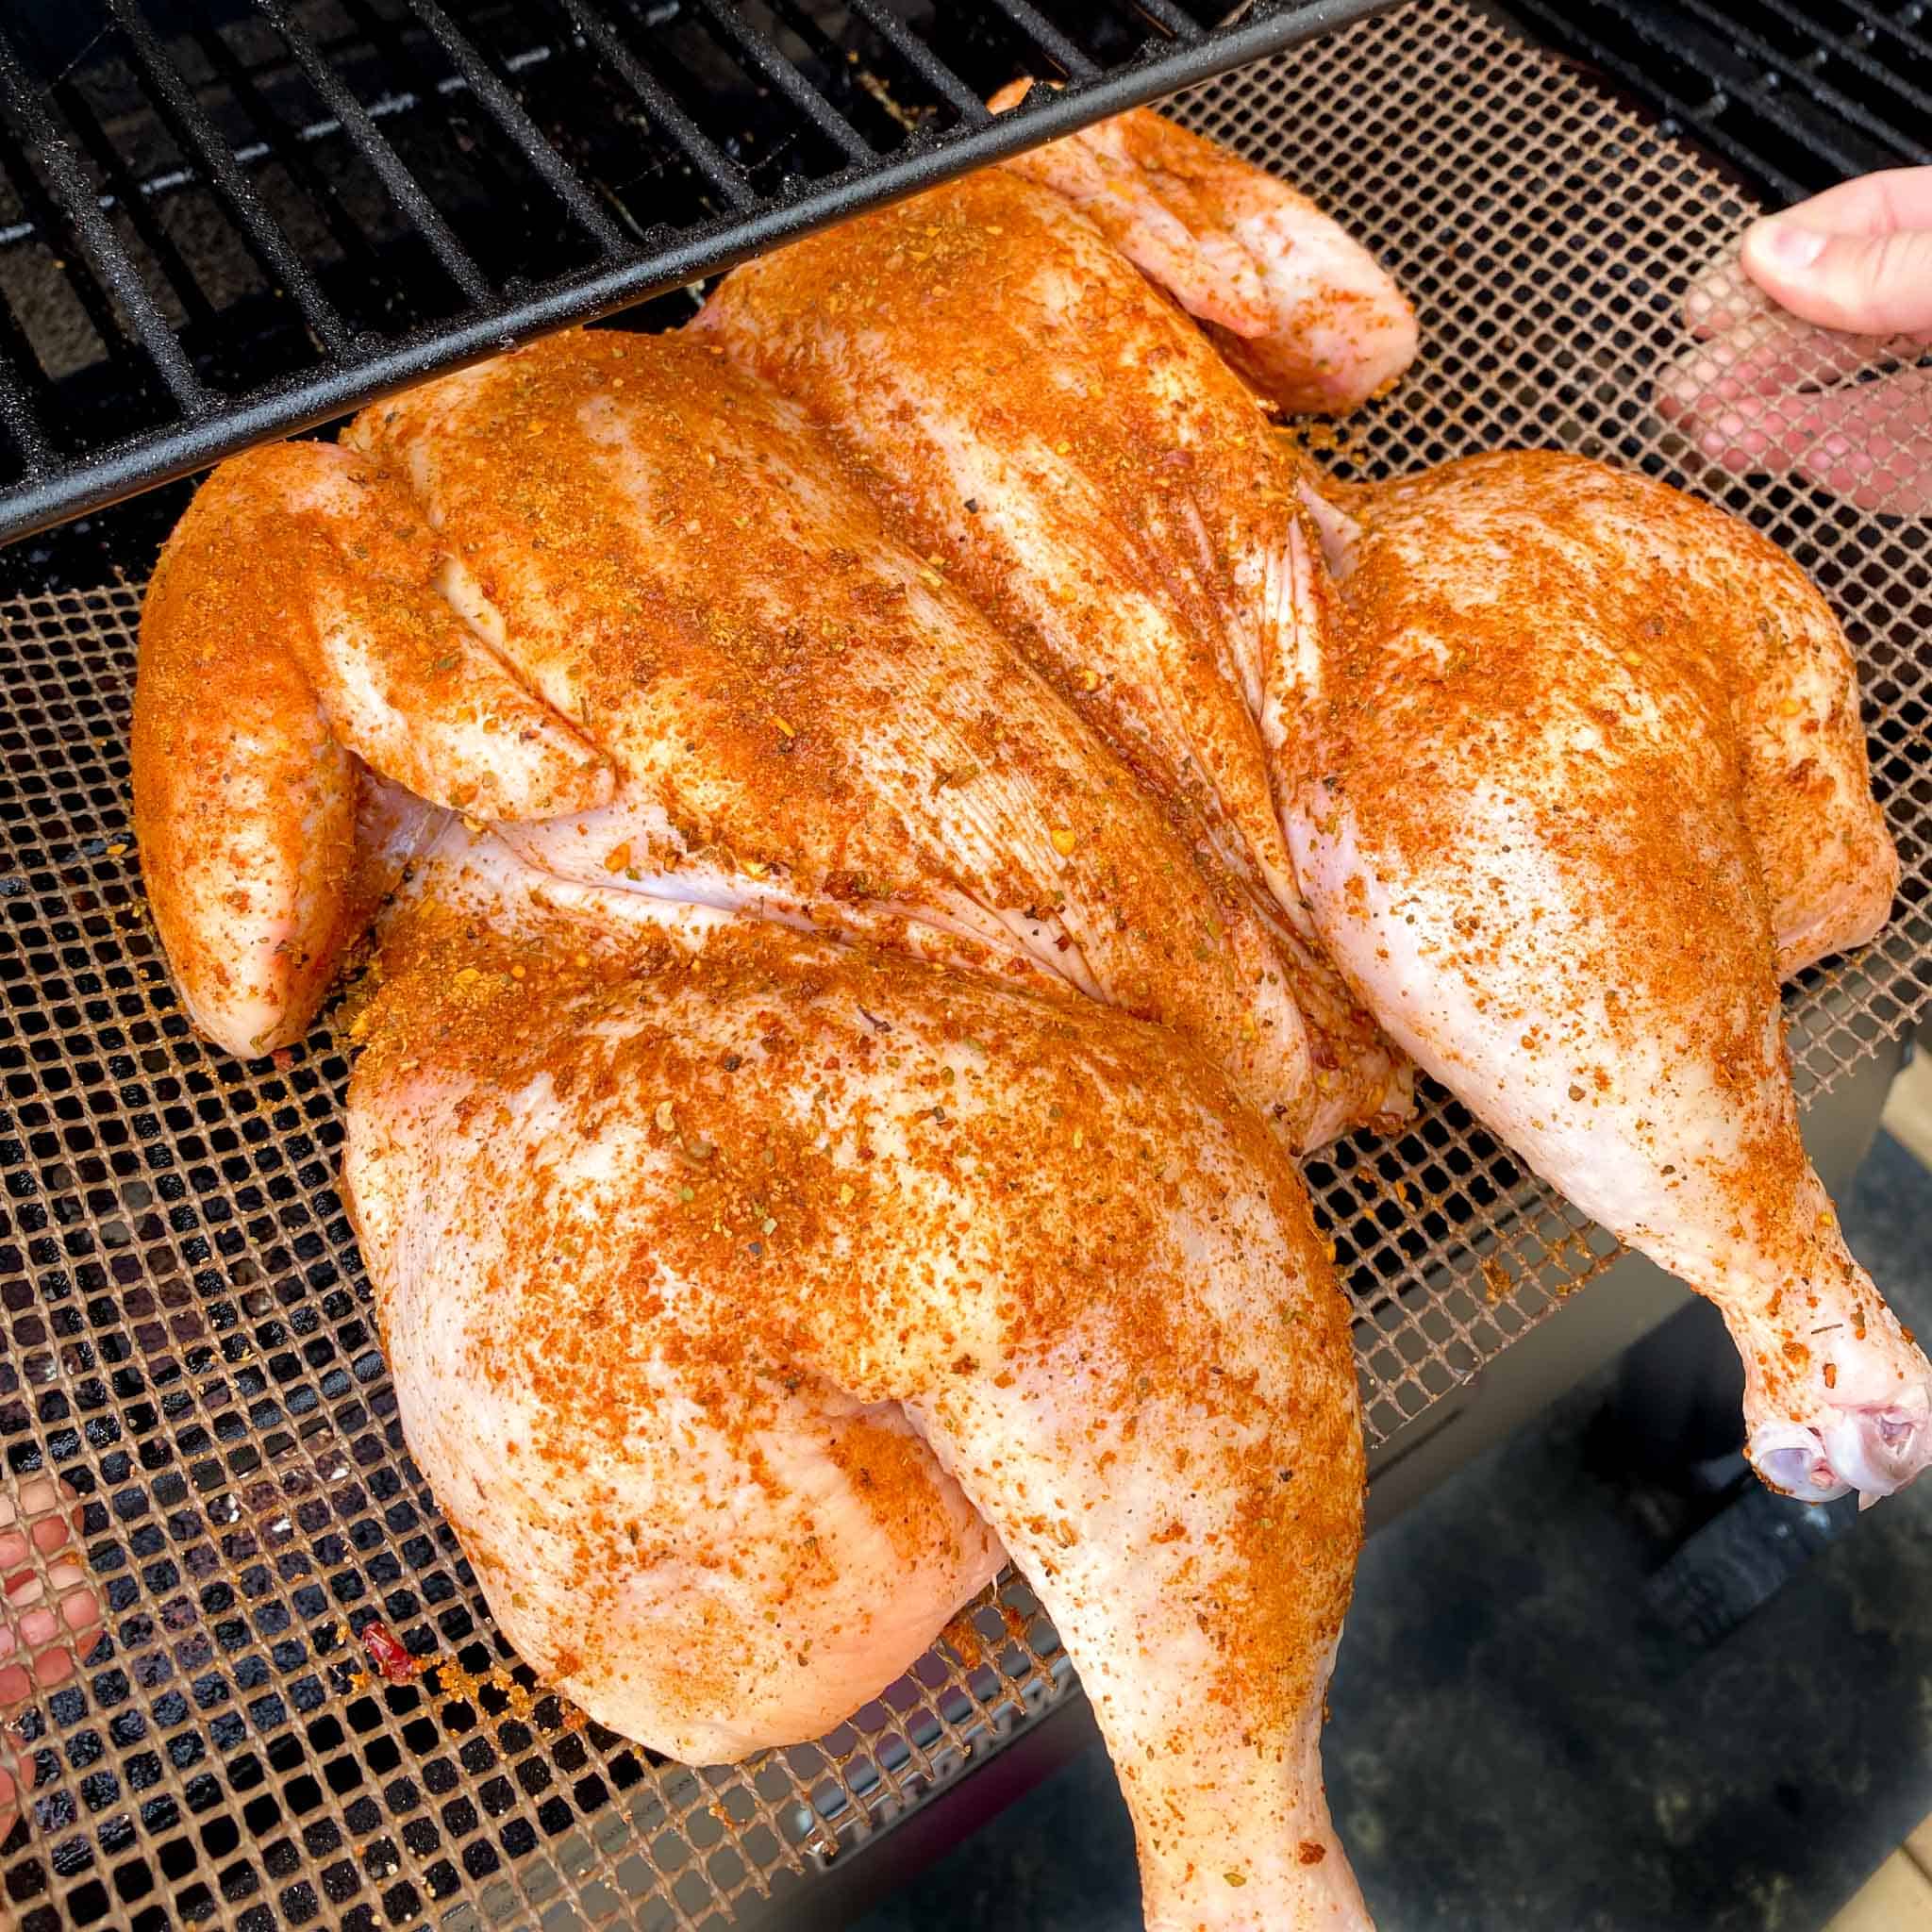 Spatchcock chicken on a grilling mat being put onto a traeger pellet grill.